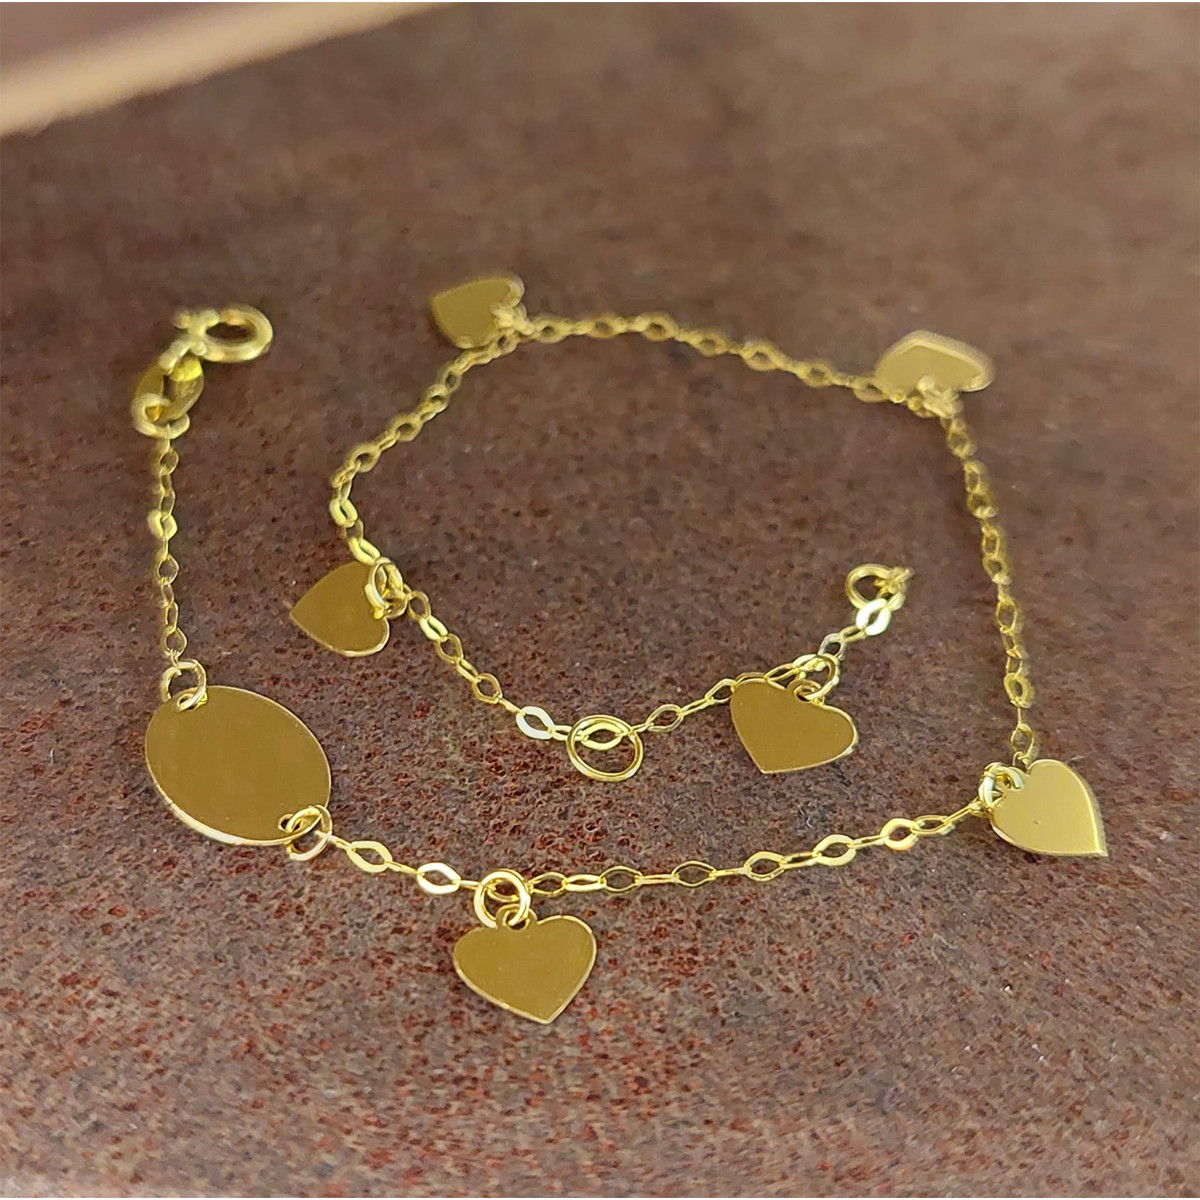 GOLD BRACELET WITH 5 HEARTS